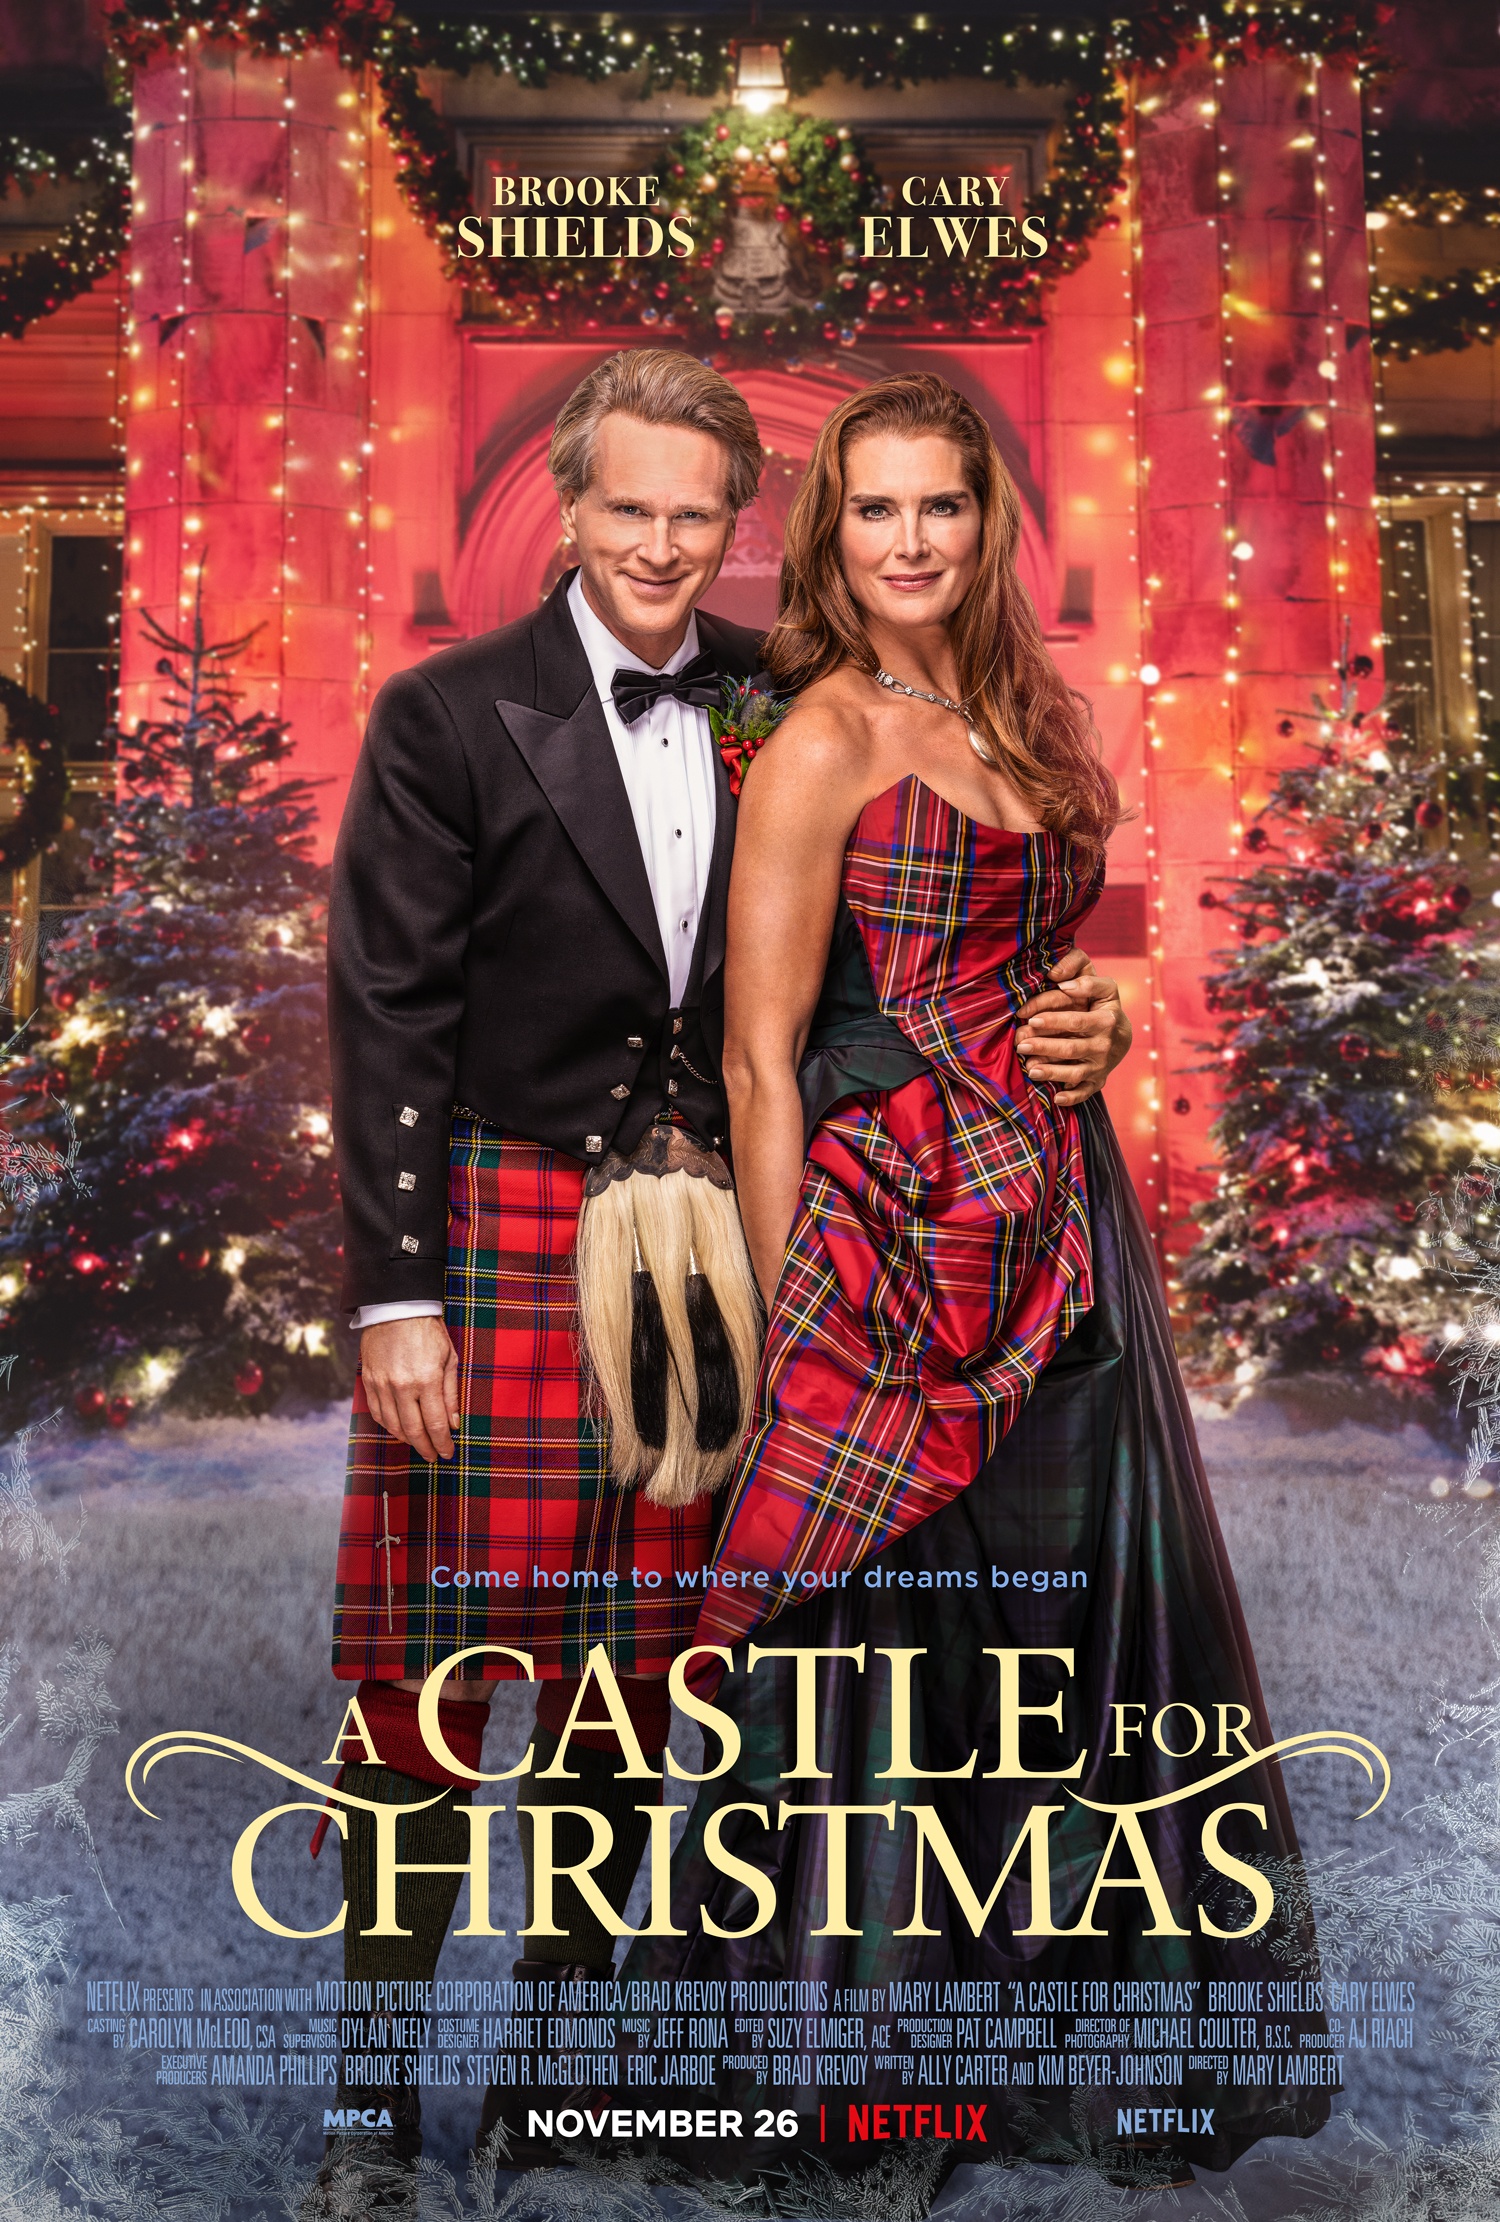 New Movie: Netflix’s A Castle For Christmas Starring Brooke Shields, Cary Elwes